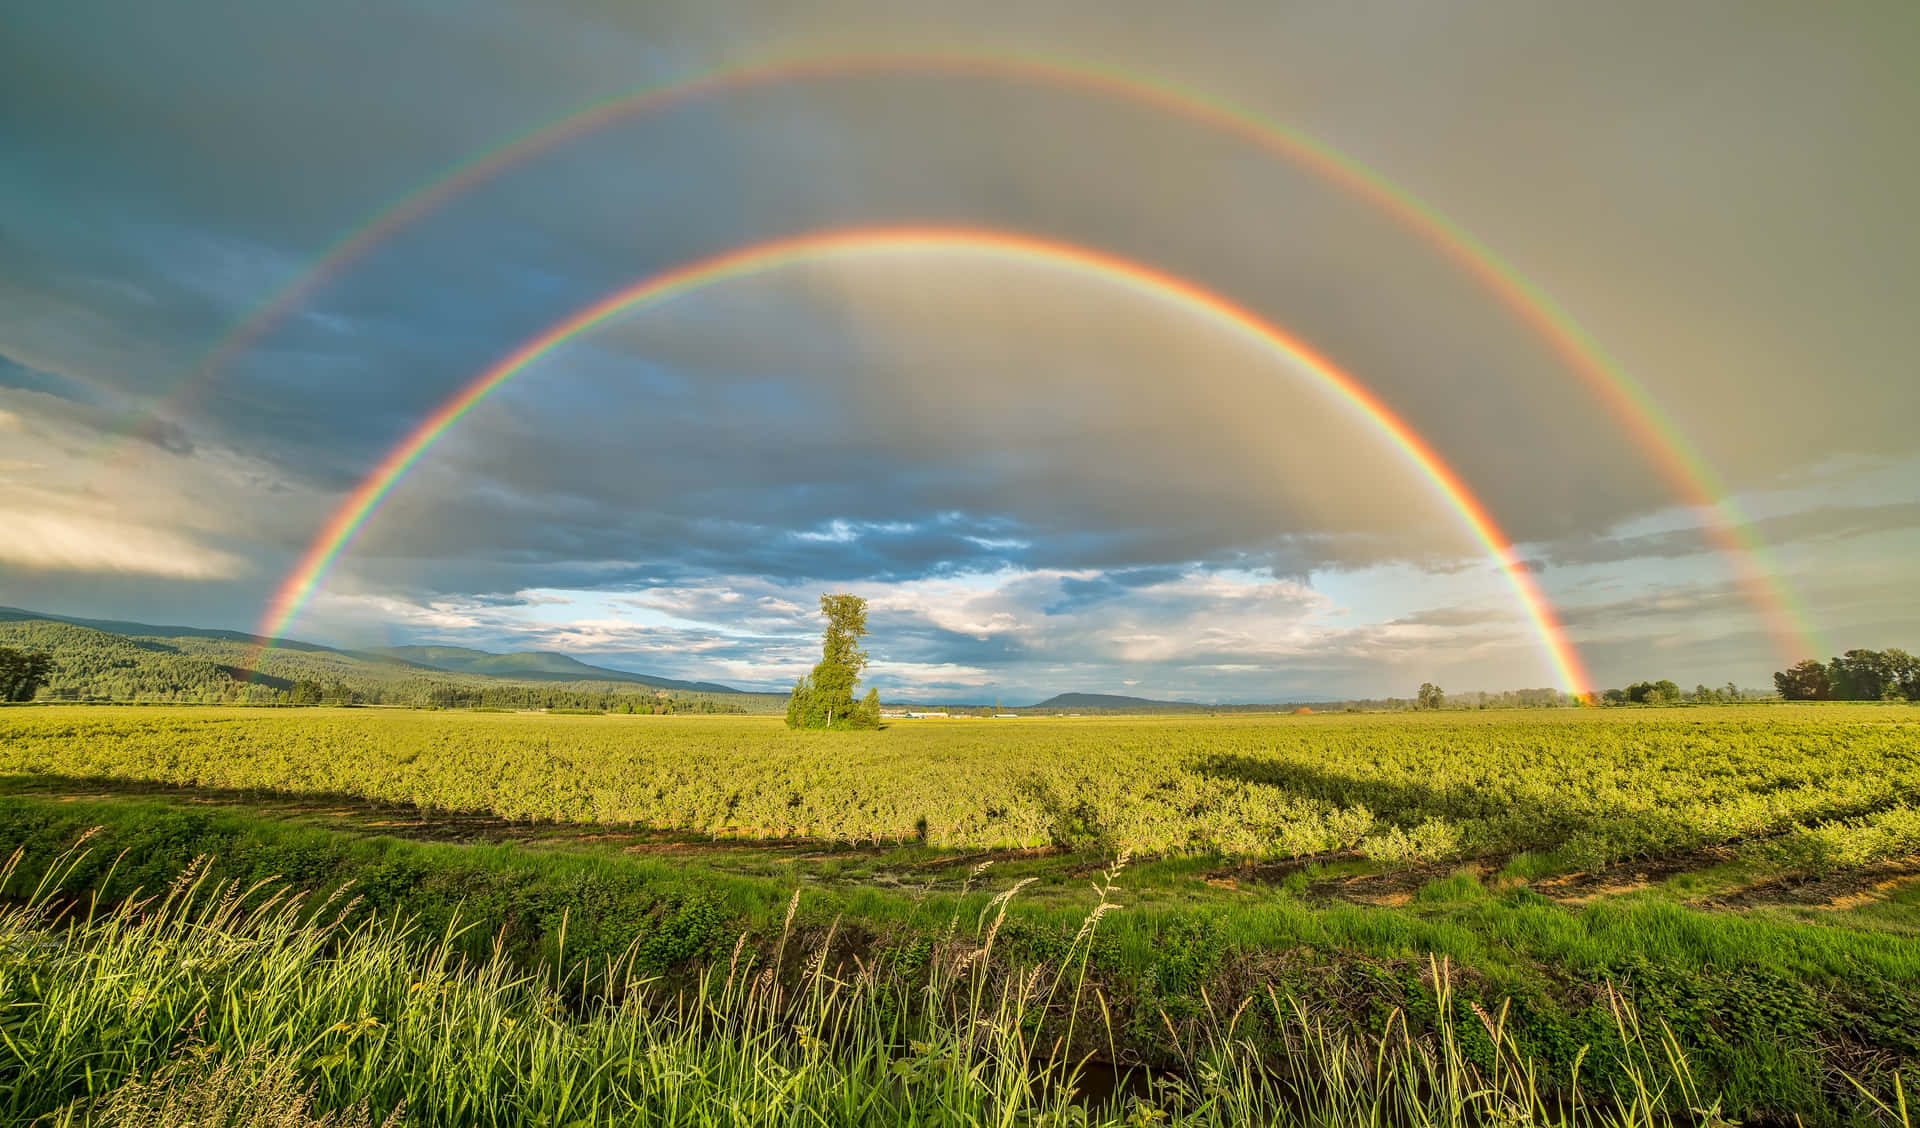 A colorful rainbow stretching across a bright blue sky